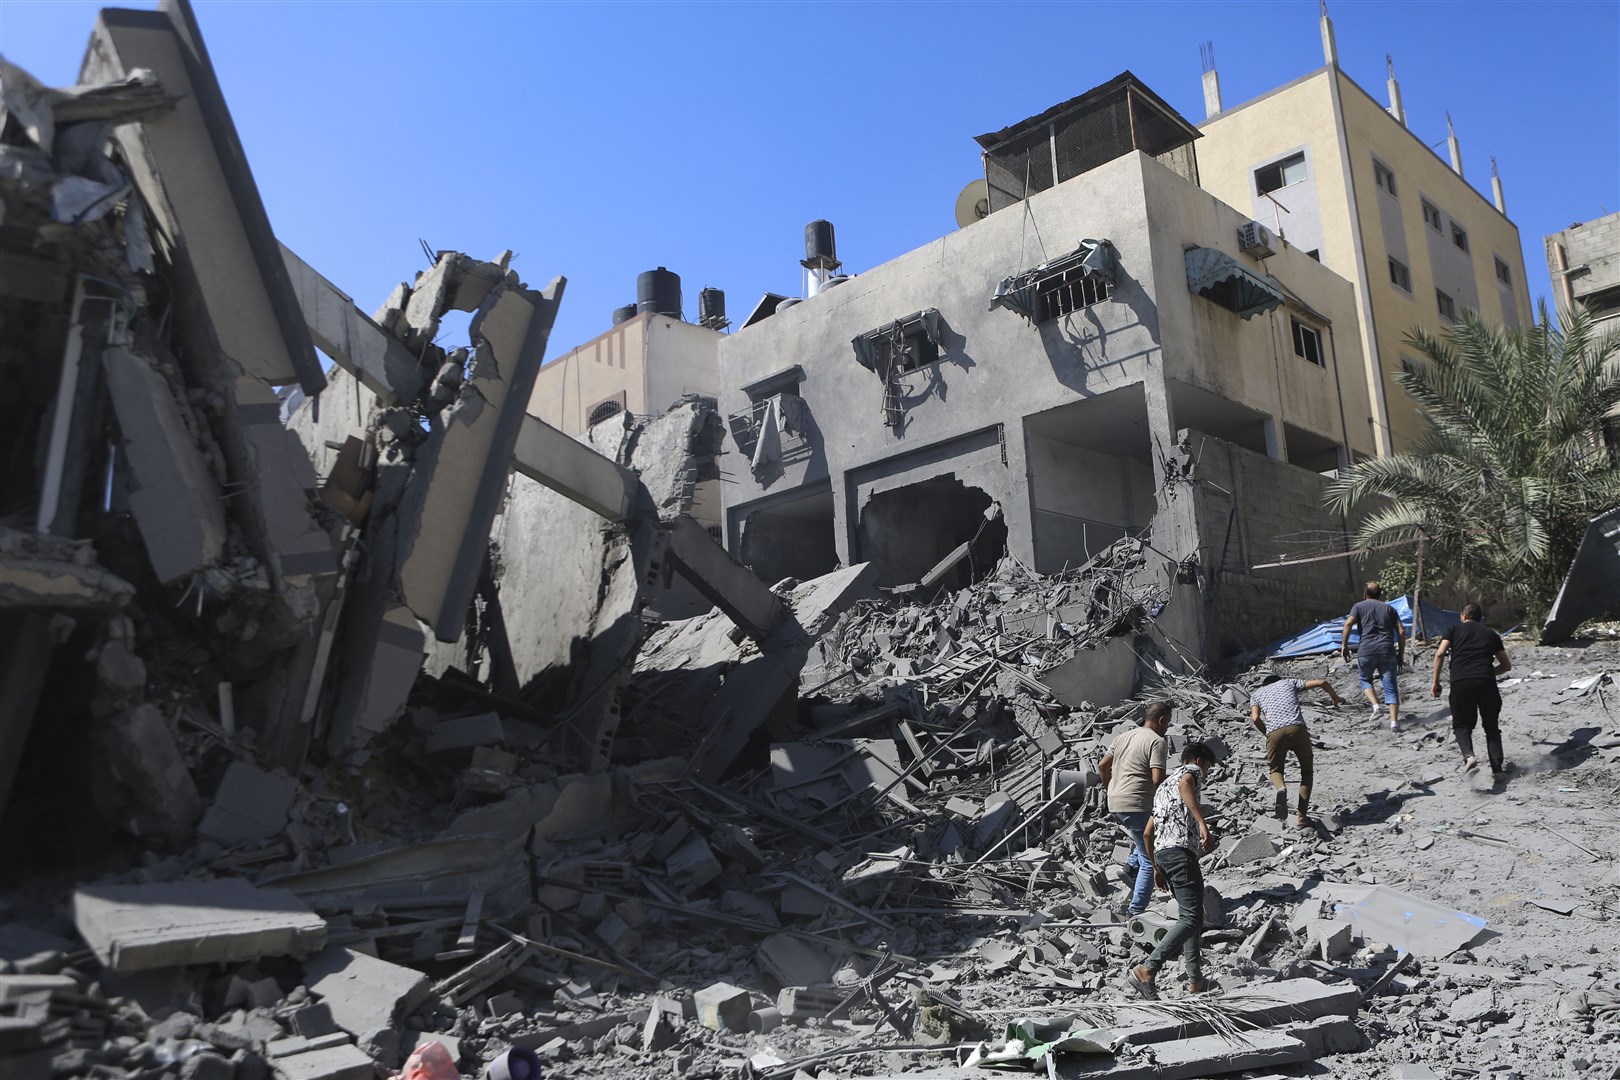 Palestinians inspect the damage of a destroyed building following Israeli air strikes on Gaza City (Abed Khaled/AP)